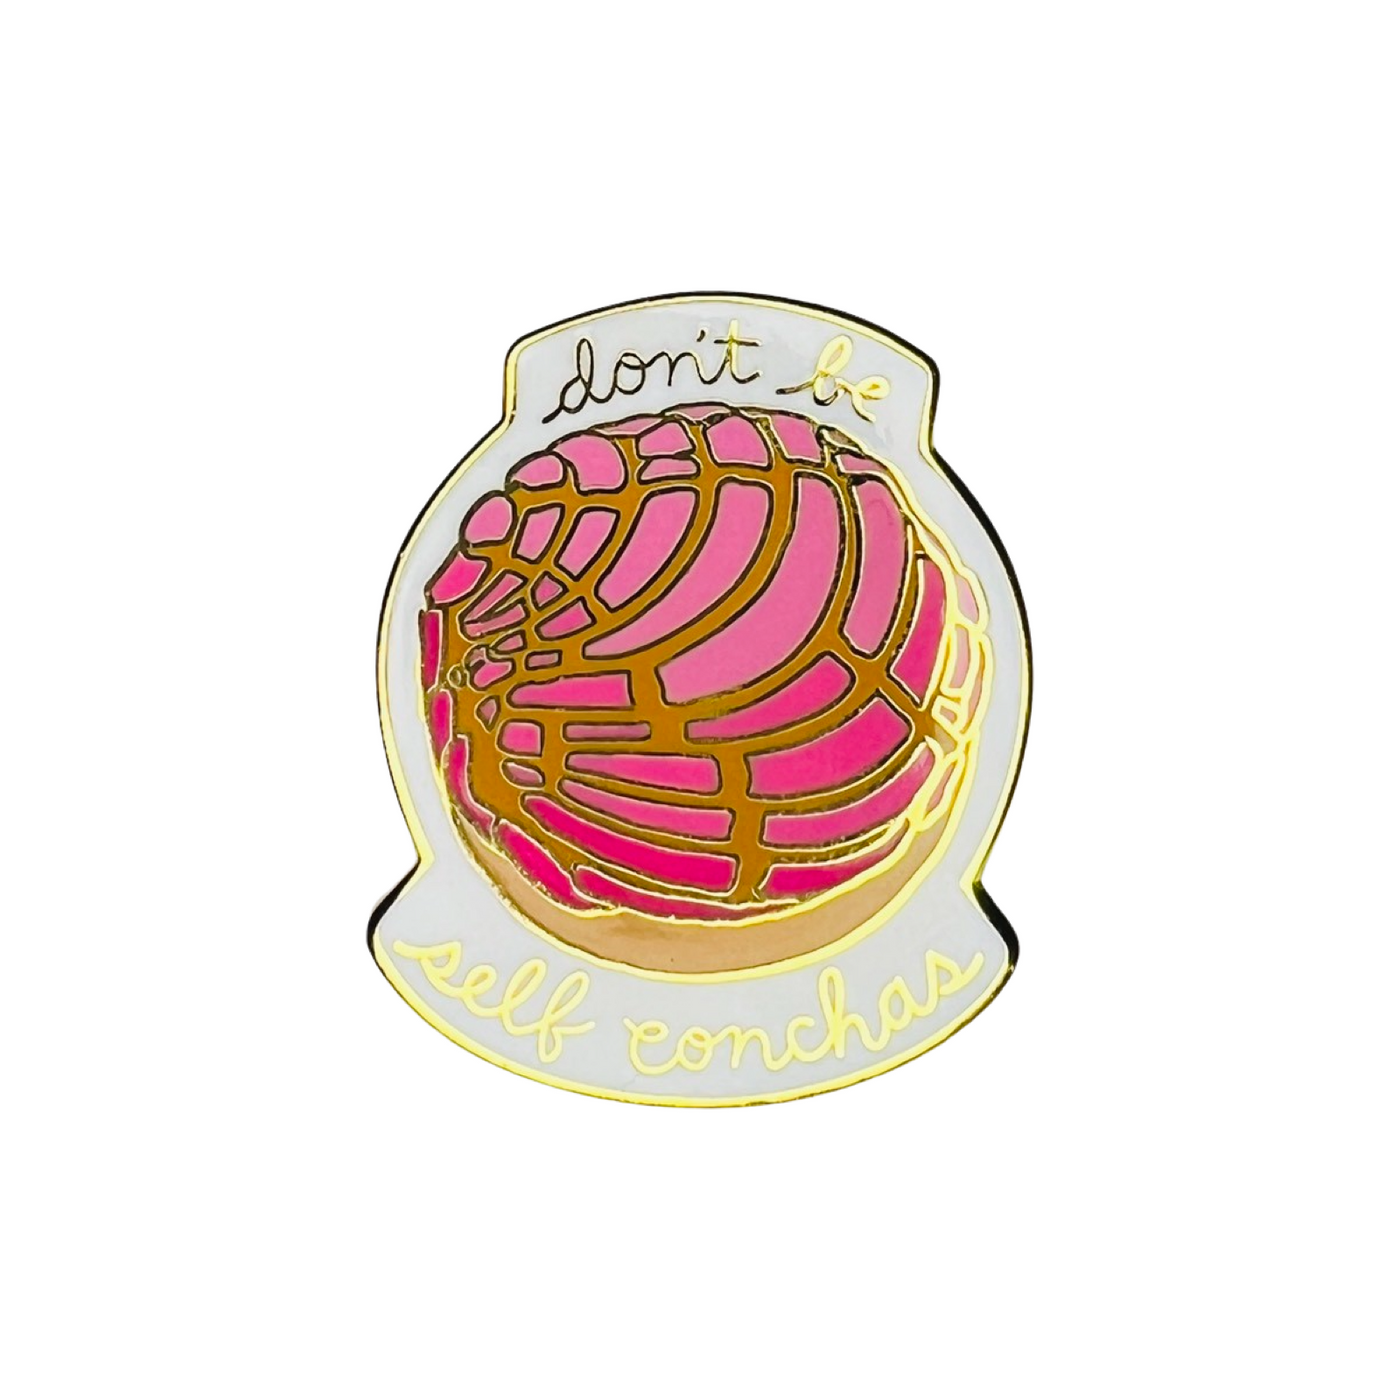 White enamel pin with an image of a pink Mexican concha pastry and the phrase Don't Be Self Conchas in gold lettering